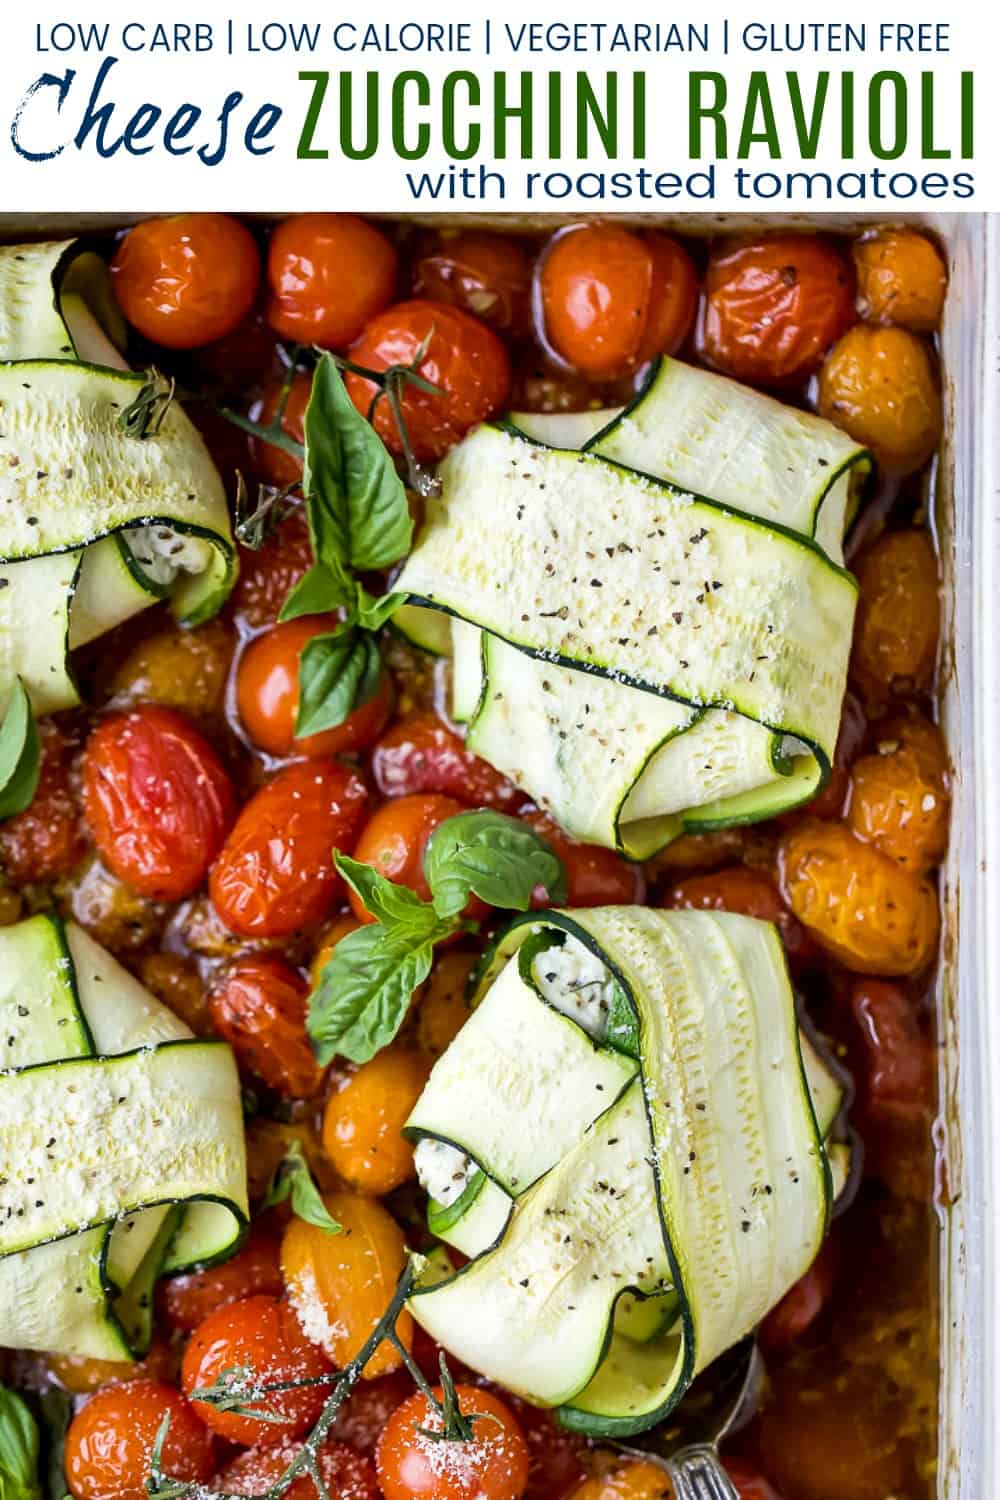 pinterest image for cheese zucchini ravioli in roasted tomato sauce